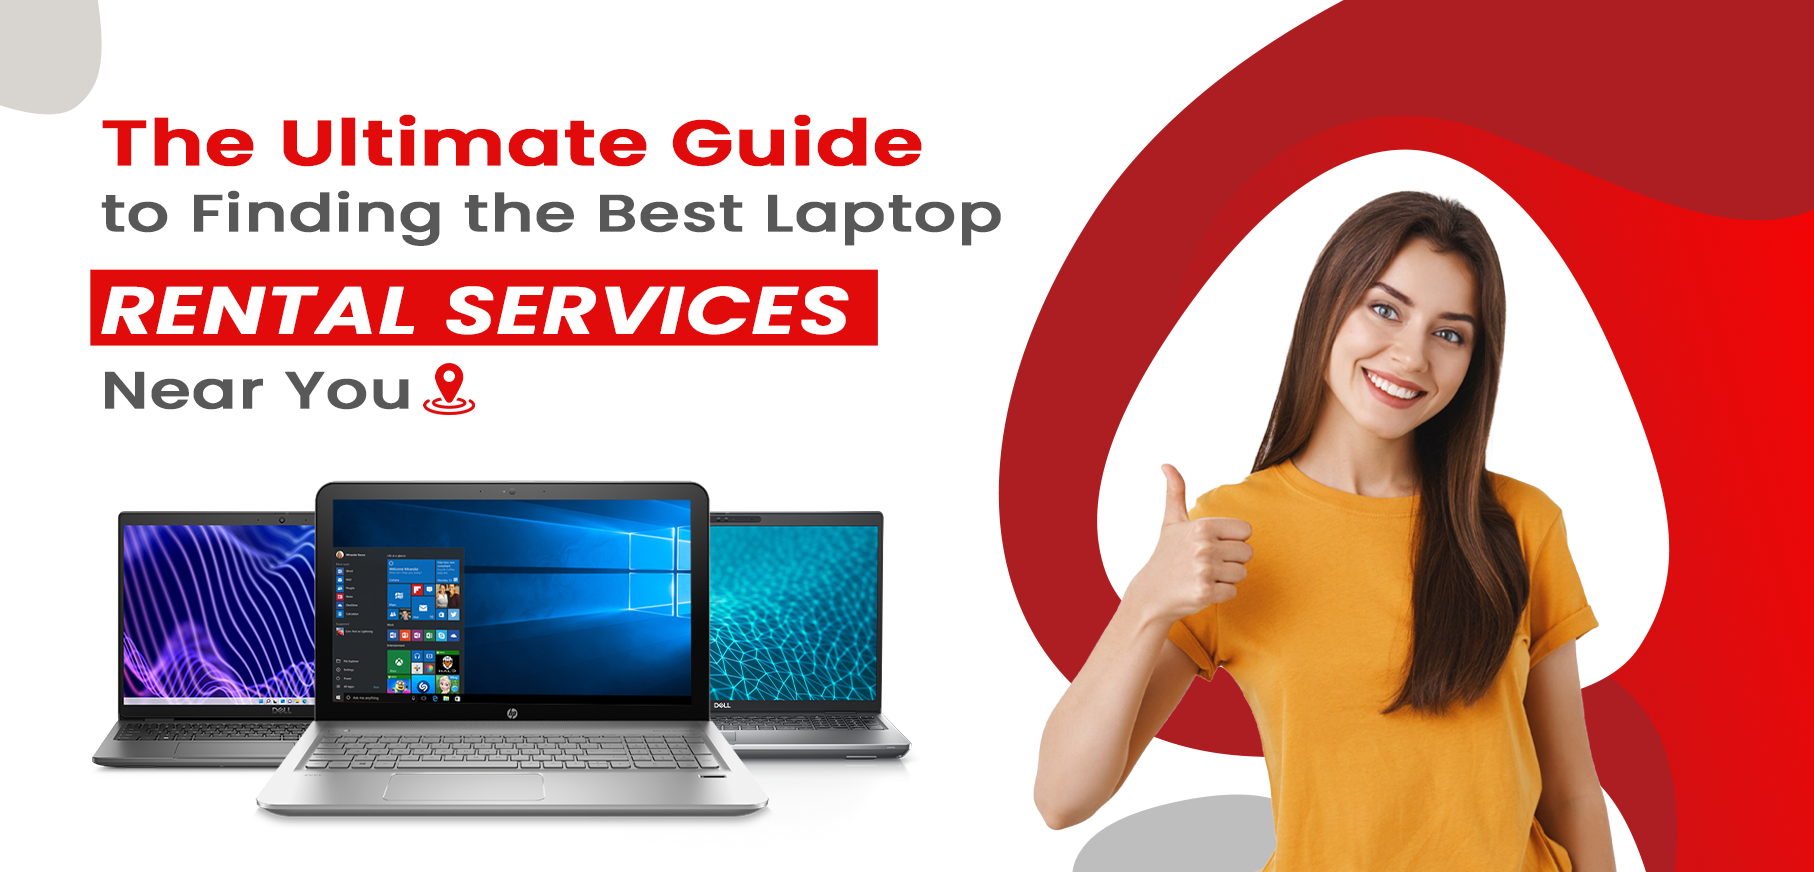 The Ultimate Guide to Finding the Best Laptop Rental Services Near You